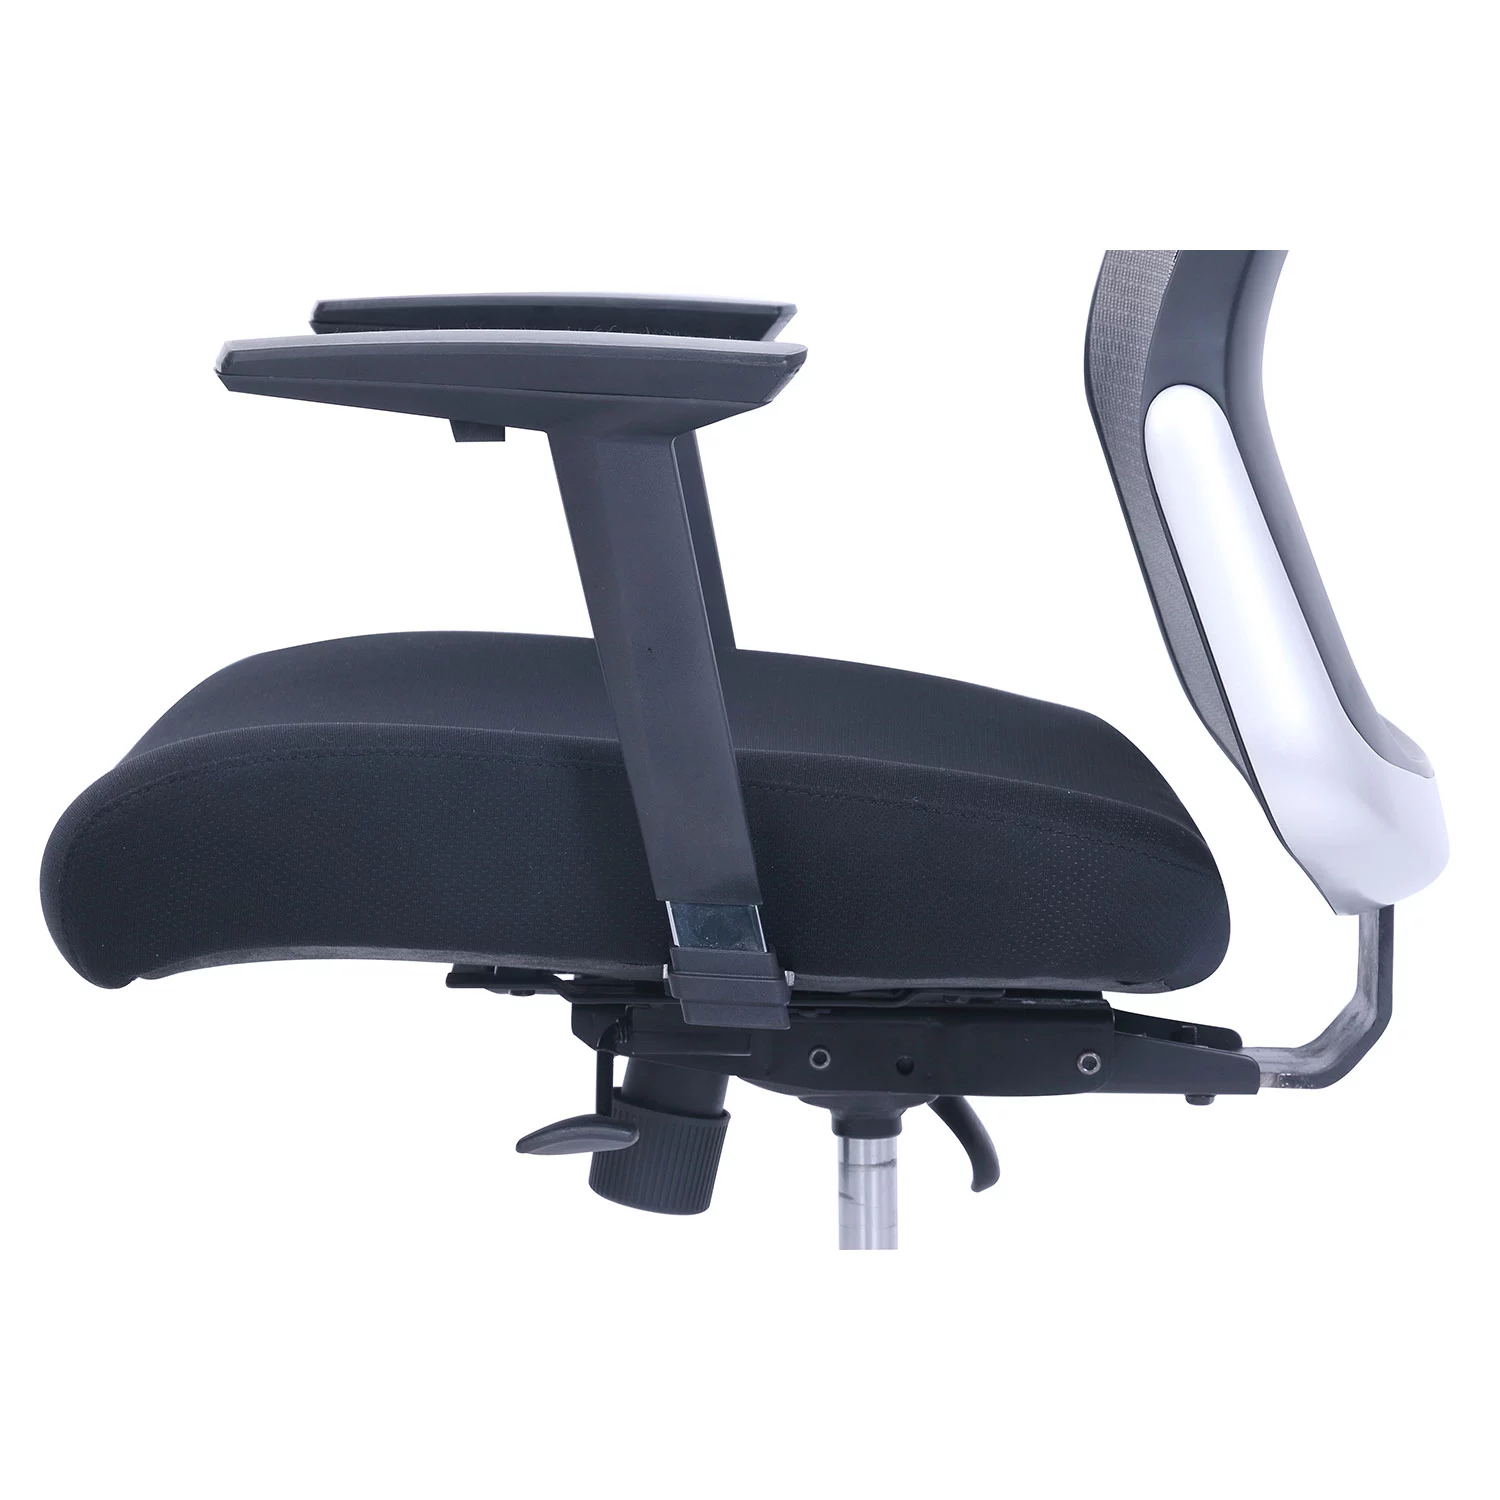 Wellness by Design Mesh Task Chair (Supports up to 125 kg.)